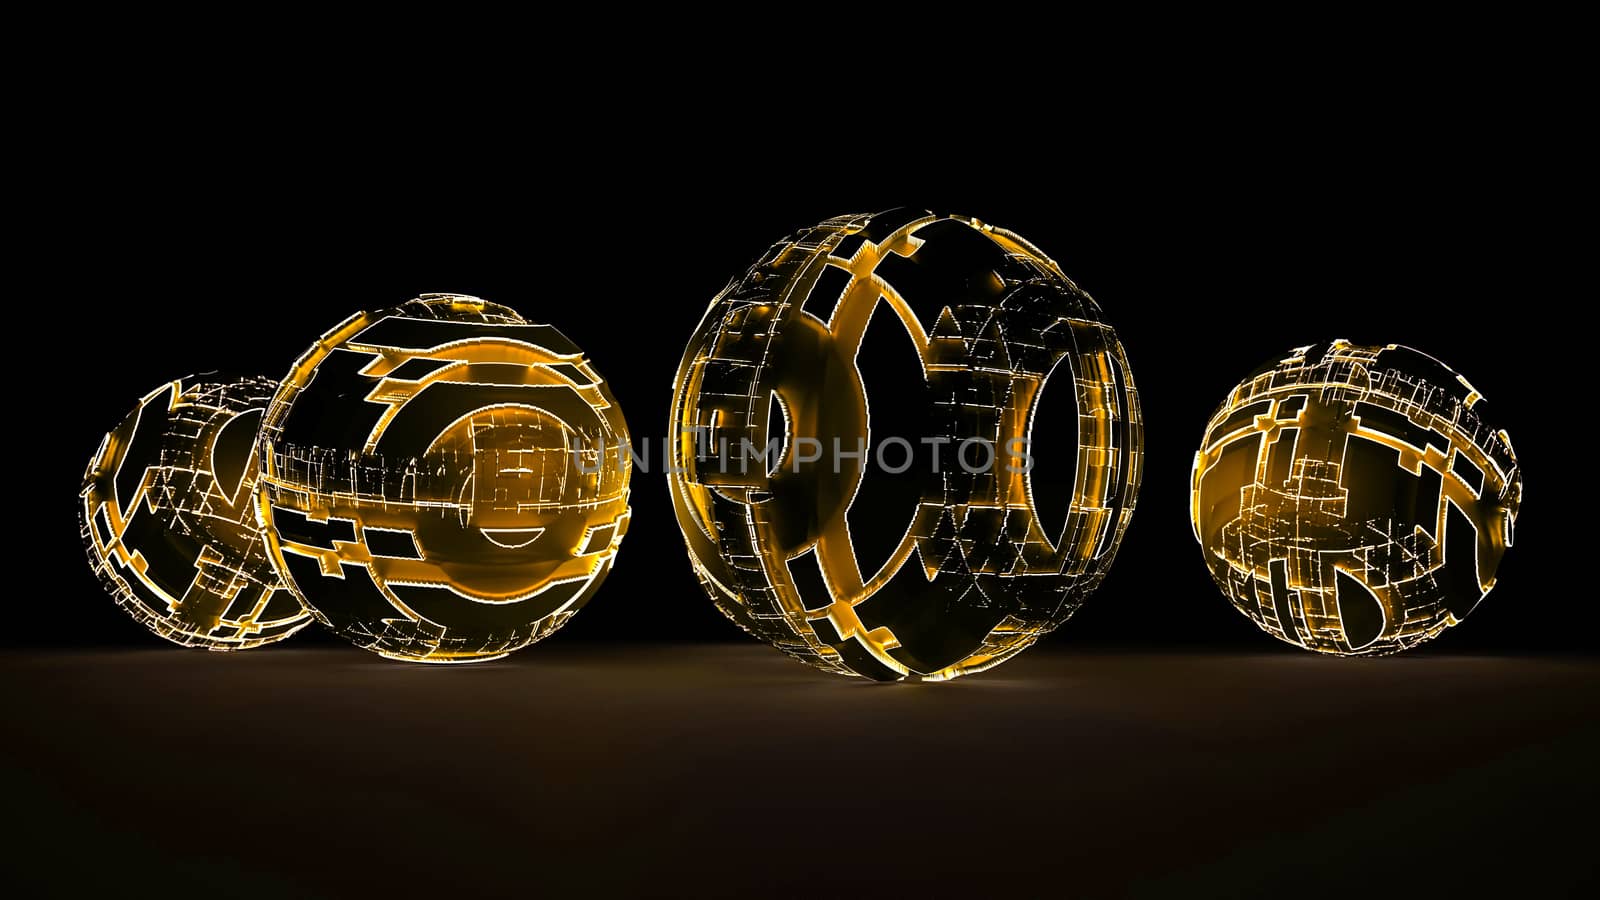 Abstract Futuristic Spheres Glowing Yellow Light Lay On The Black Surface. Futuristic Background. 3D Illustrations